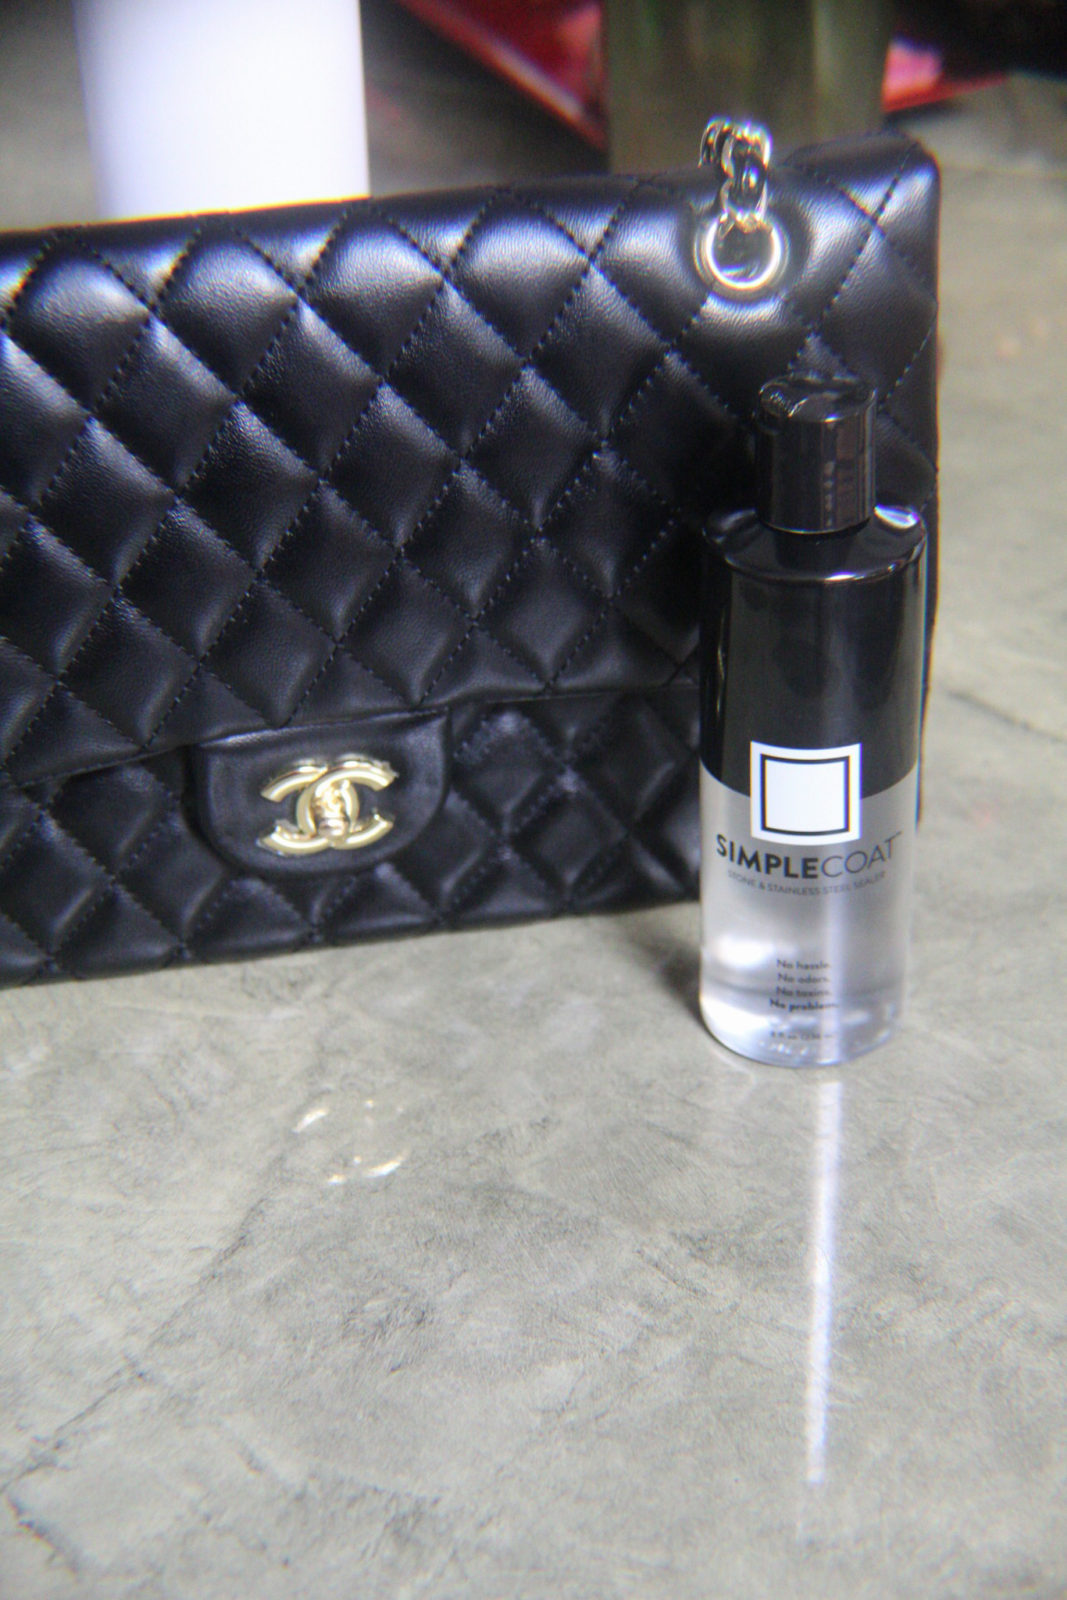 chanel bag treated with simplecoat